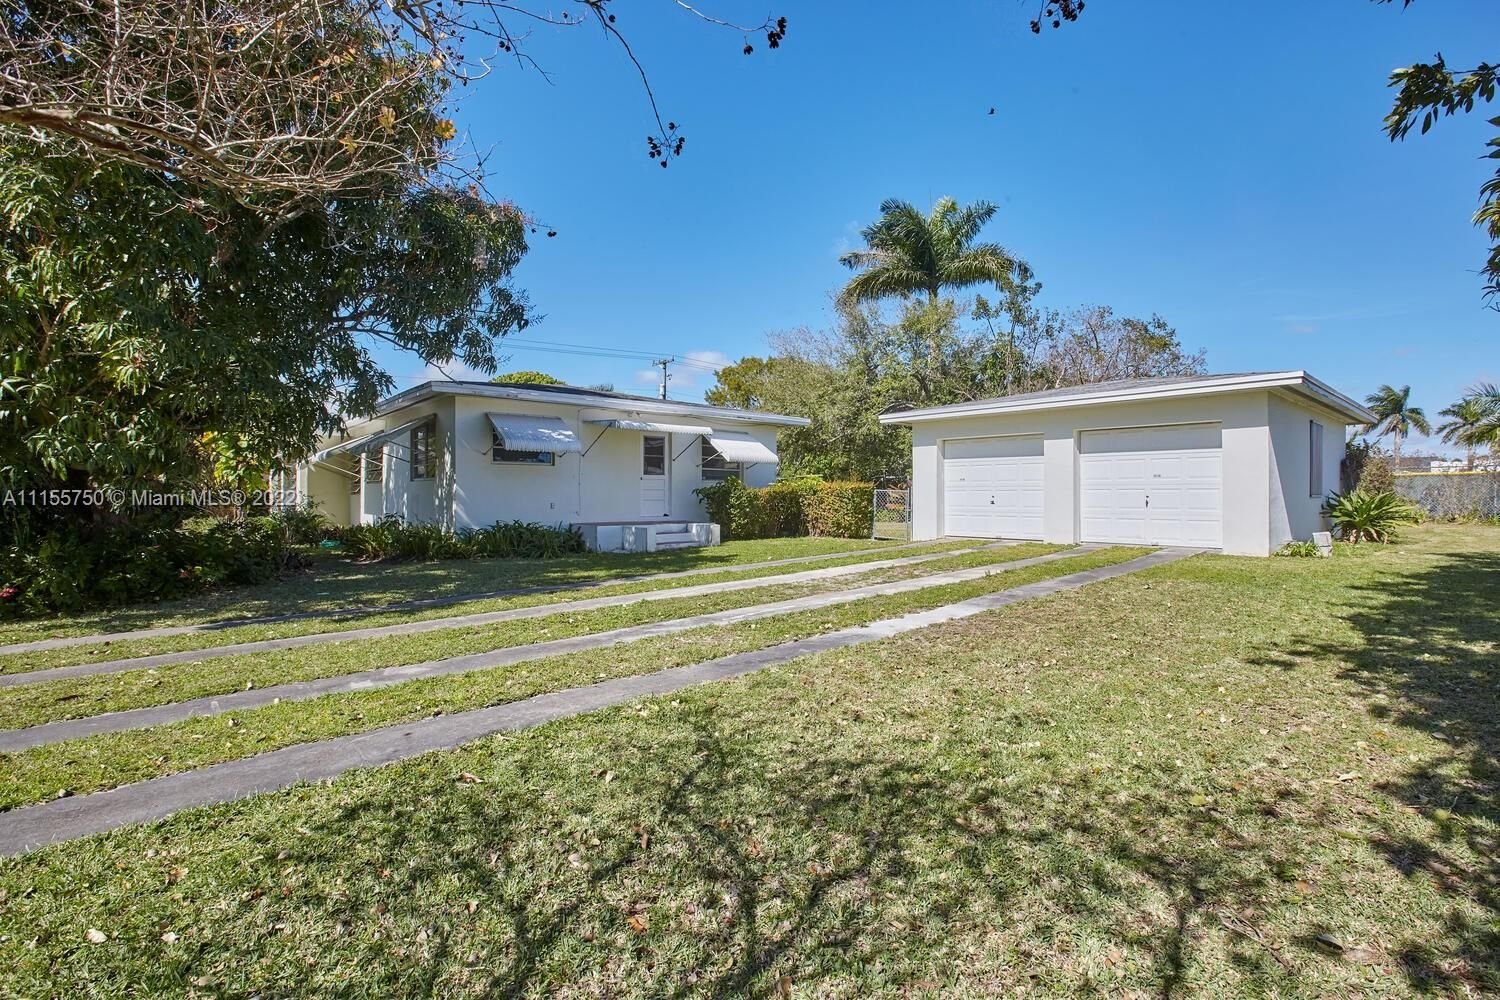 Real estate property located at 24945 134th Ave, Miami-Dade County, Homestead, FL